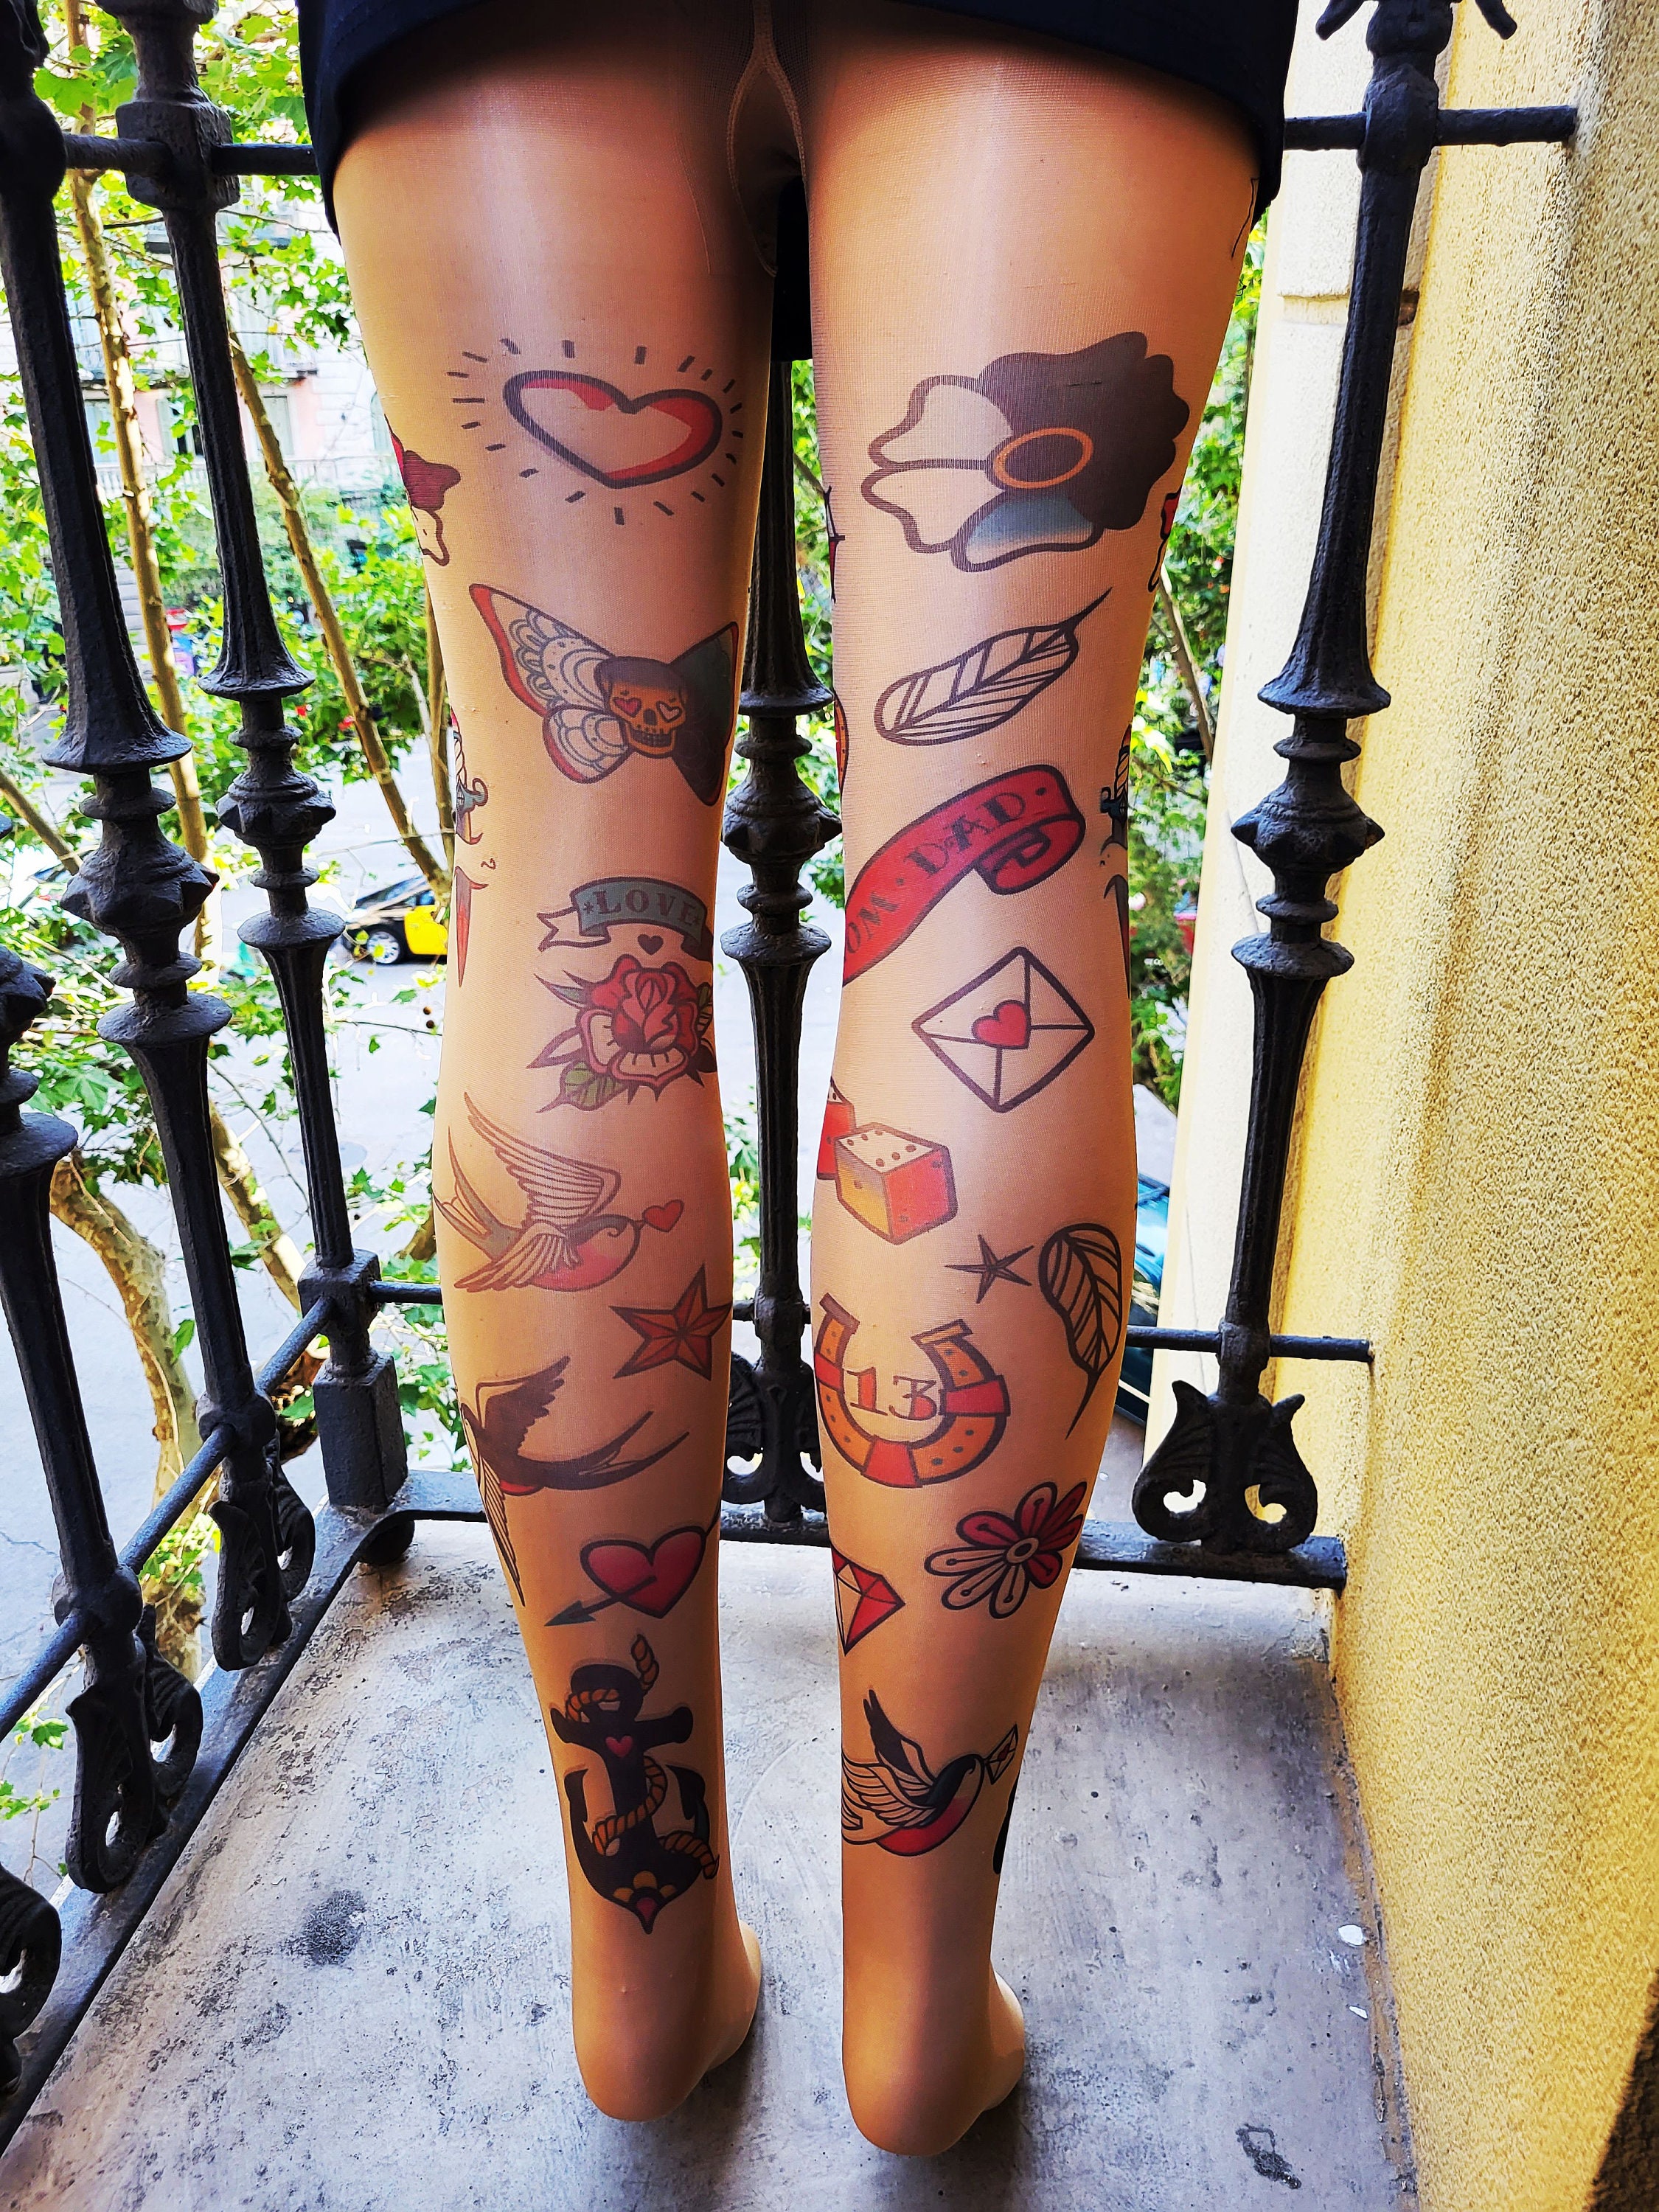 Retro Tattoo Tights: Old School Charm on Your Legs, Tights With